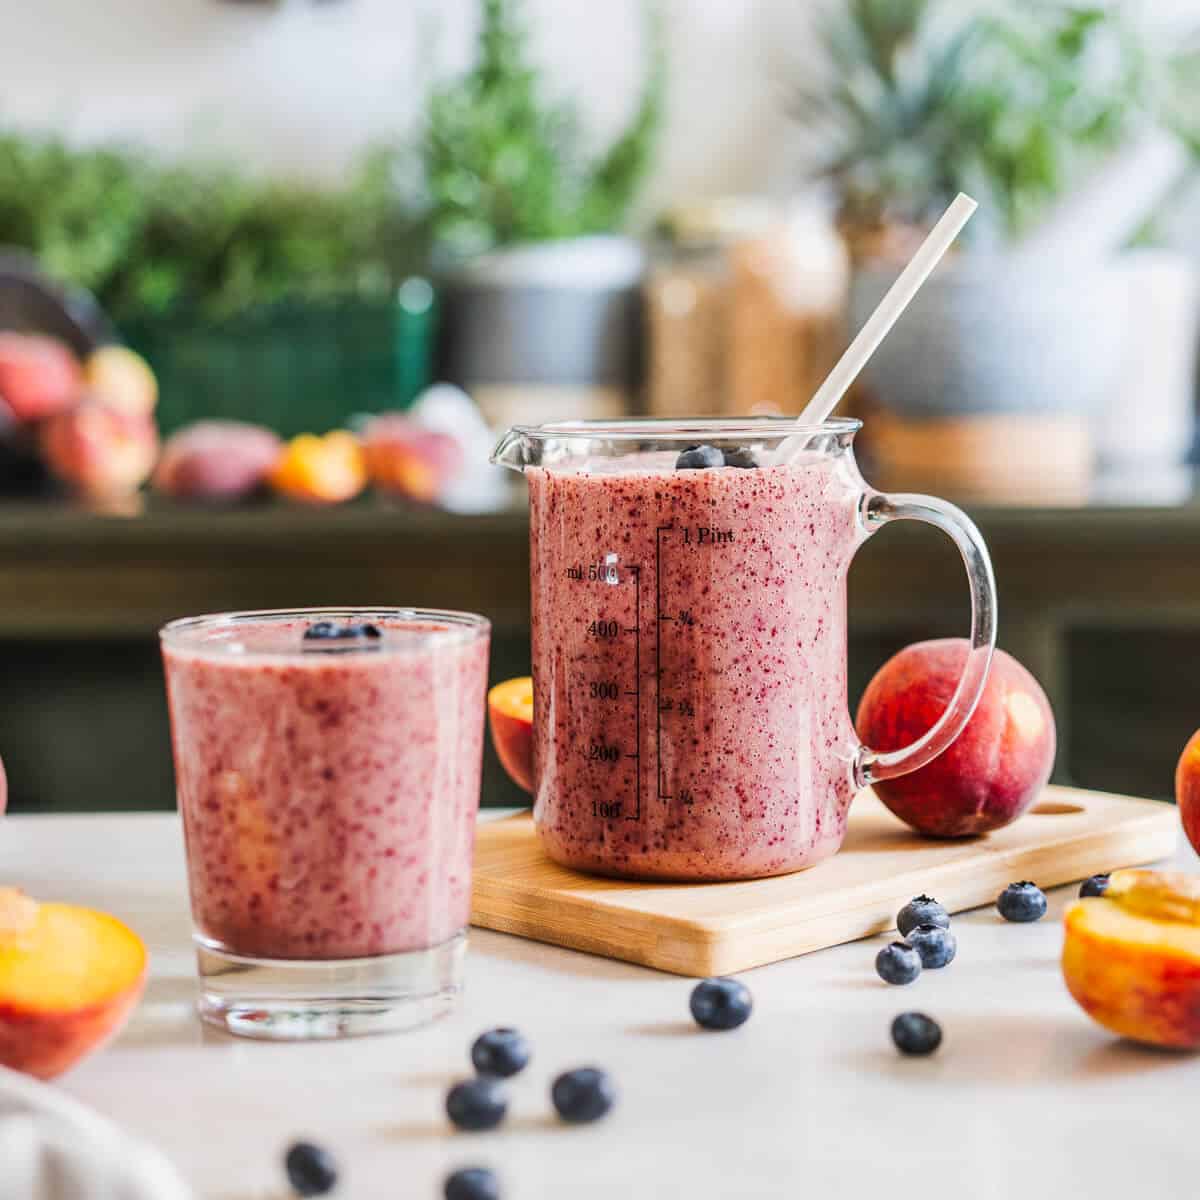 Peach Blueberry Smoothie without Yogurt or Banana (3 ingredients!)